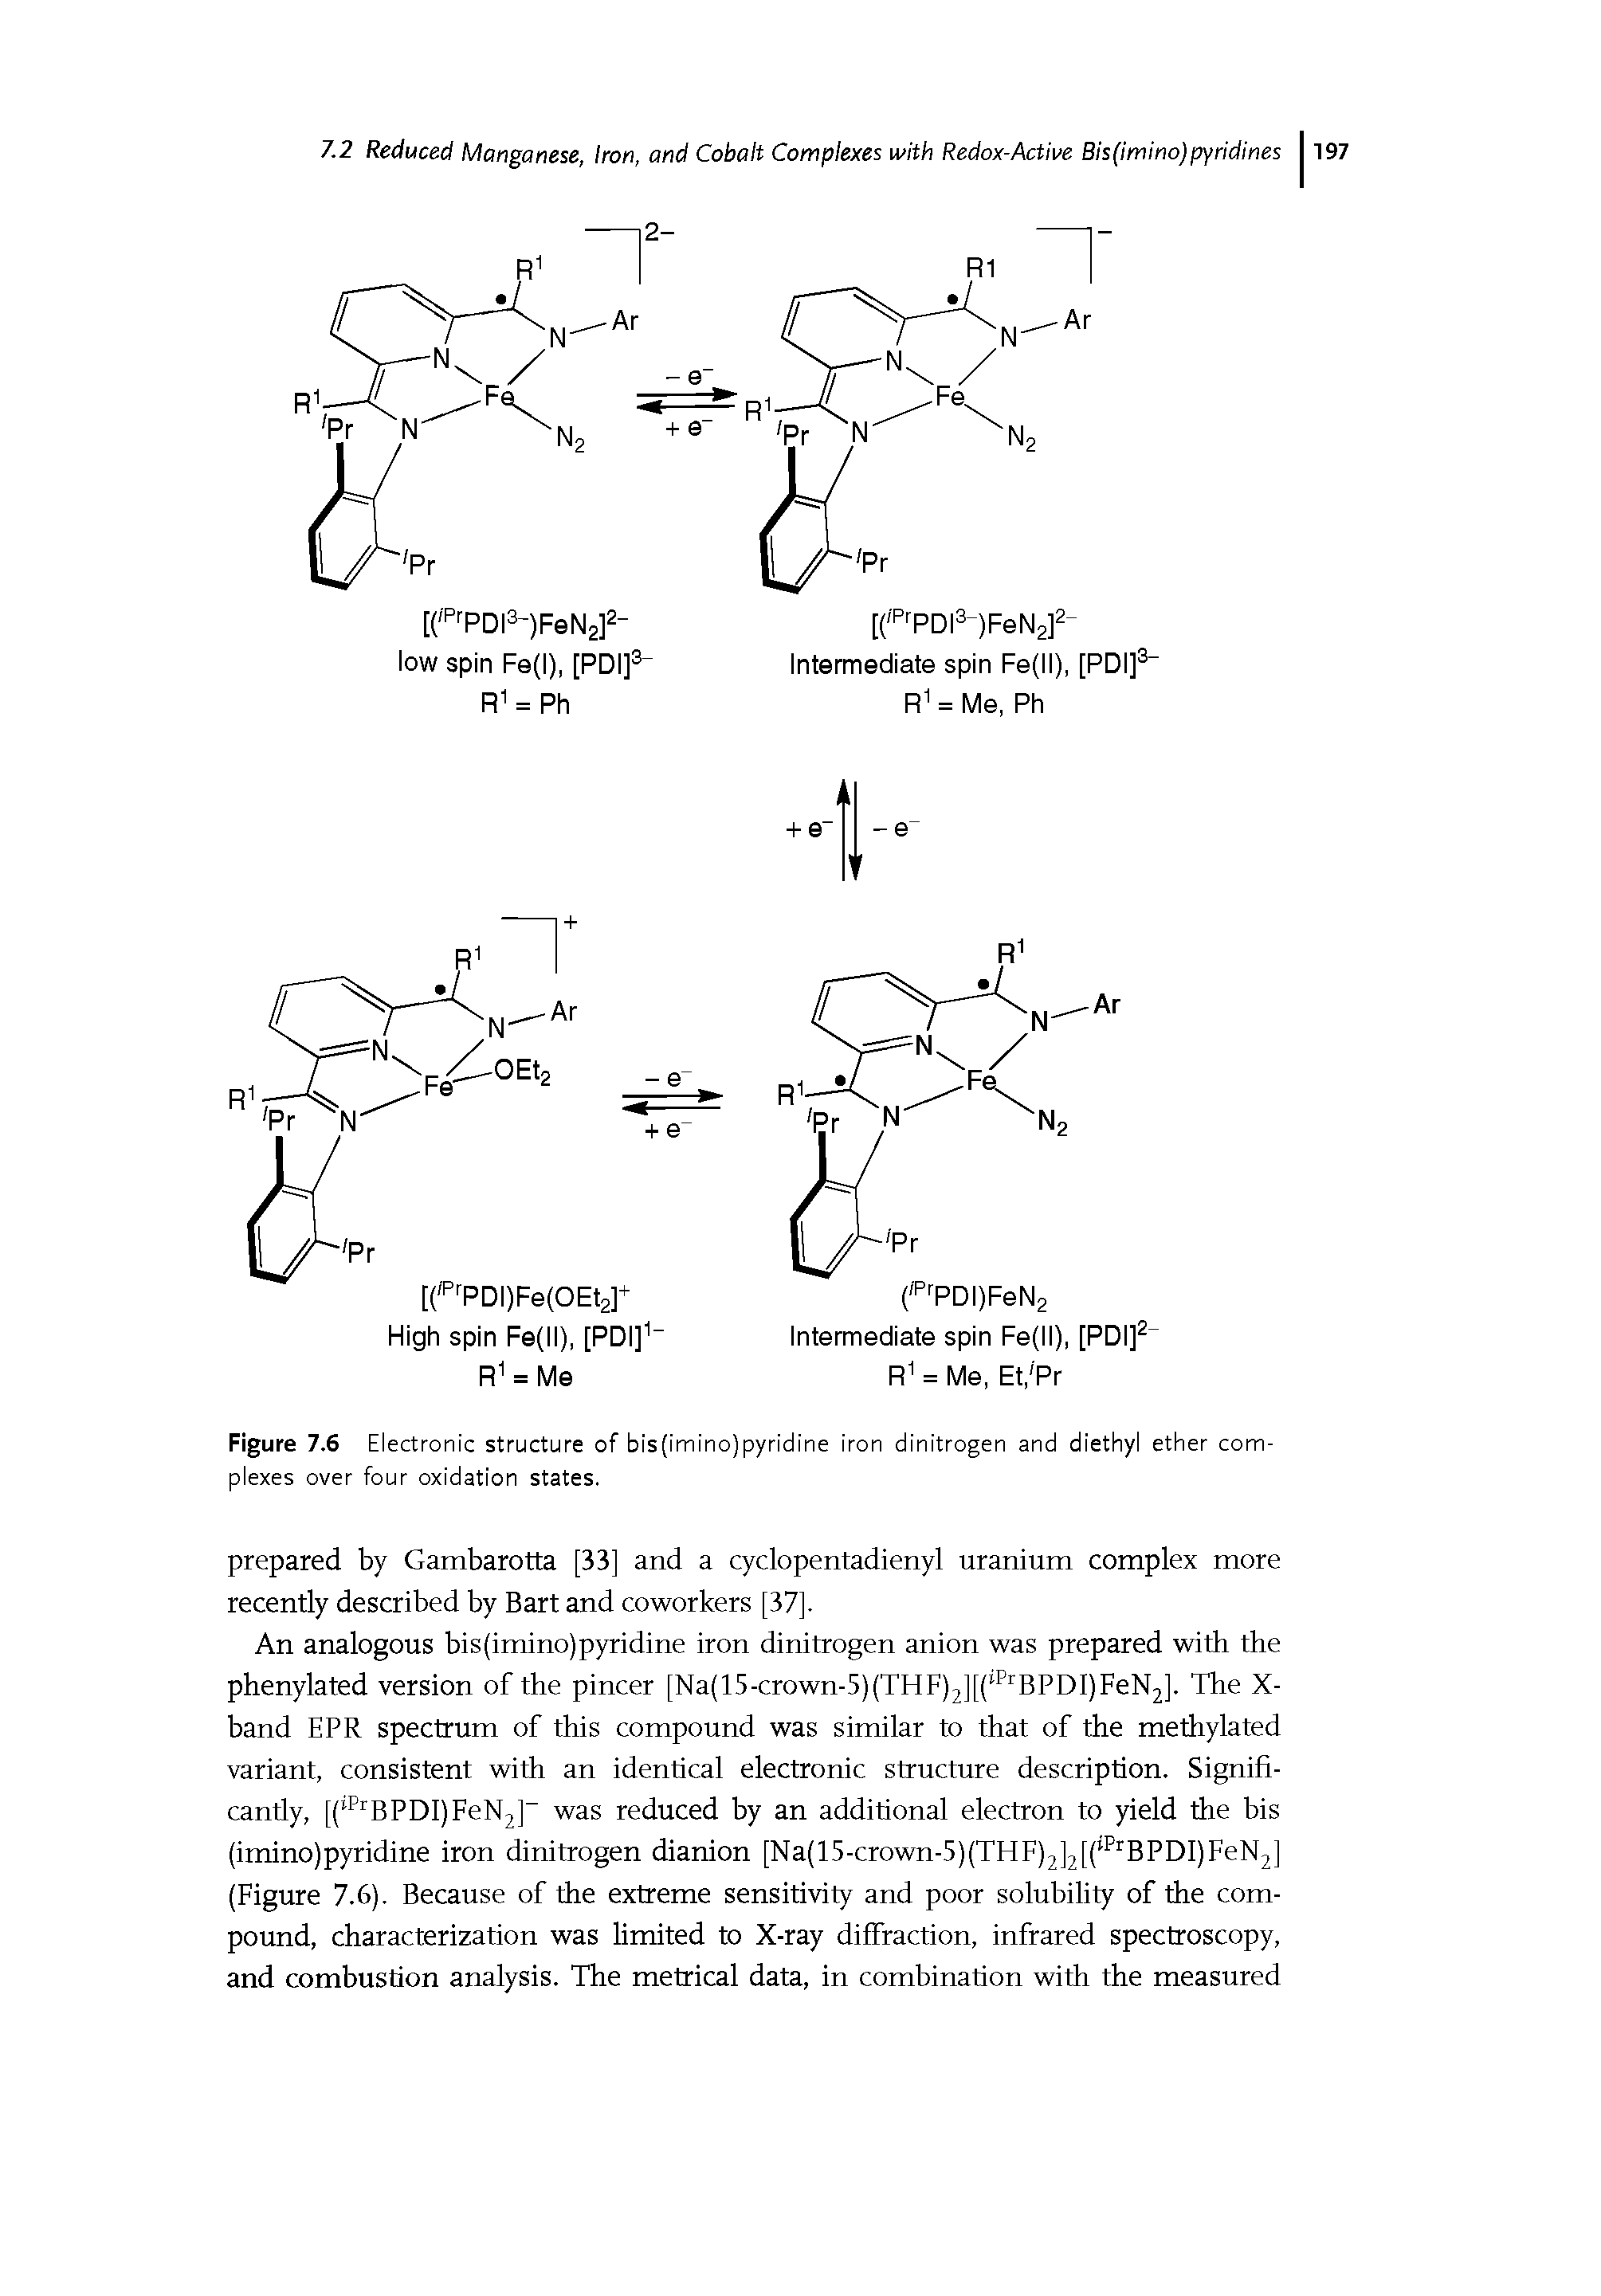 Figure 7.6 Electronic structure of bis(imino)pyridine iron dinitrogen and diethyl ether complexes over four oxidation states.